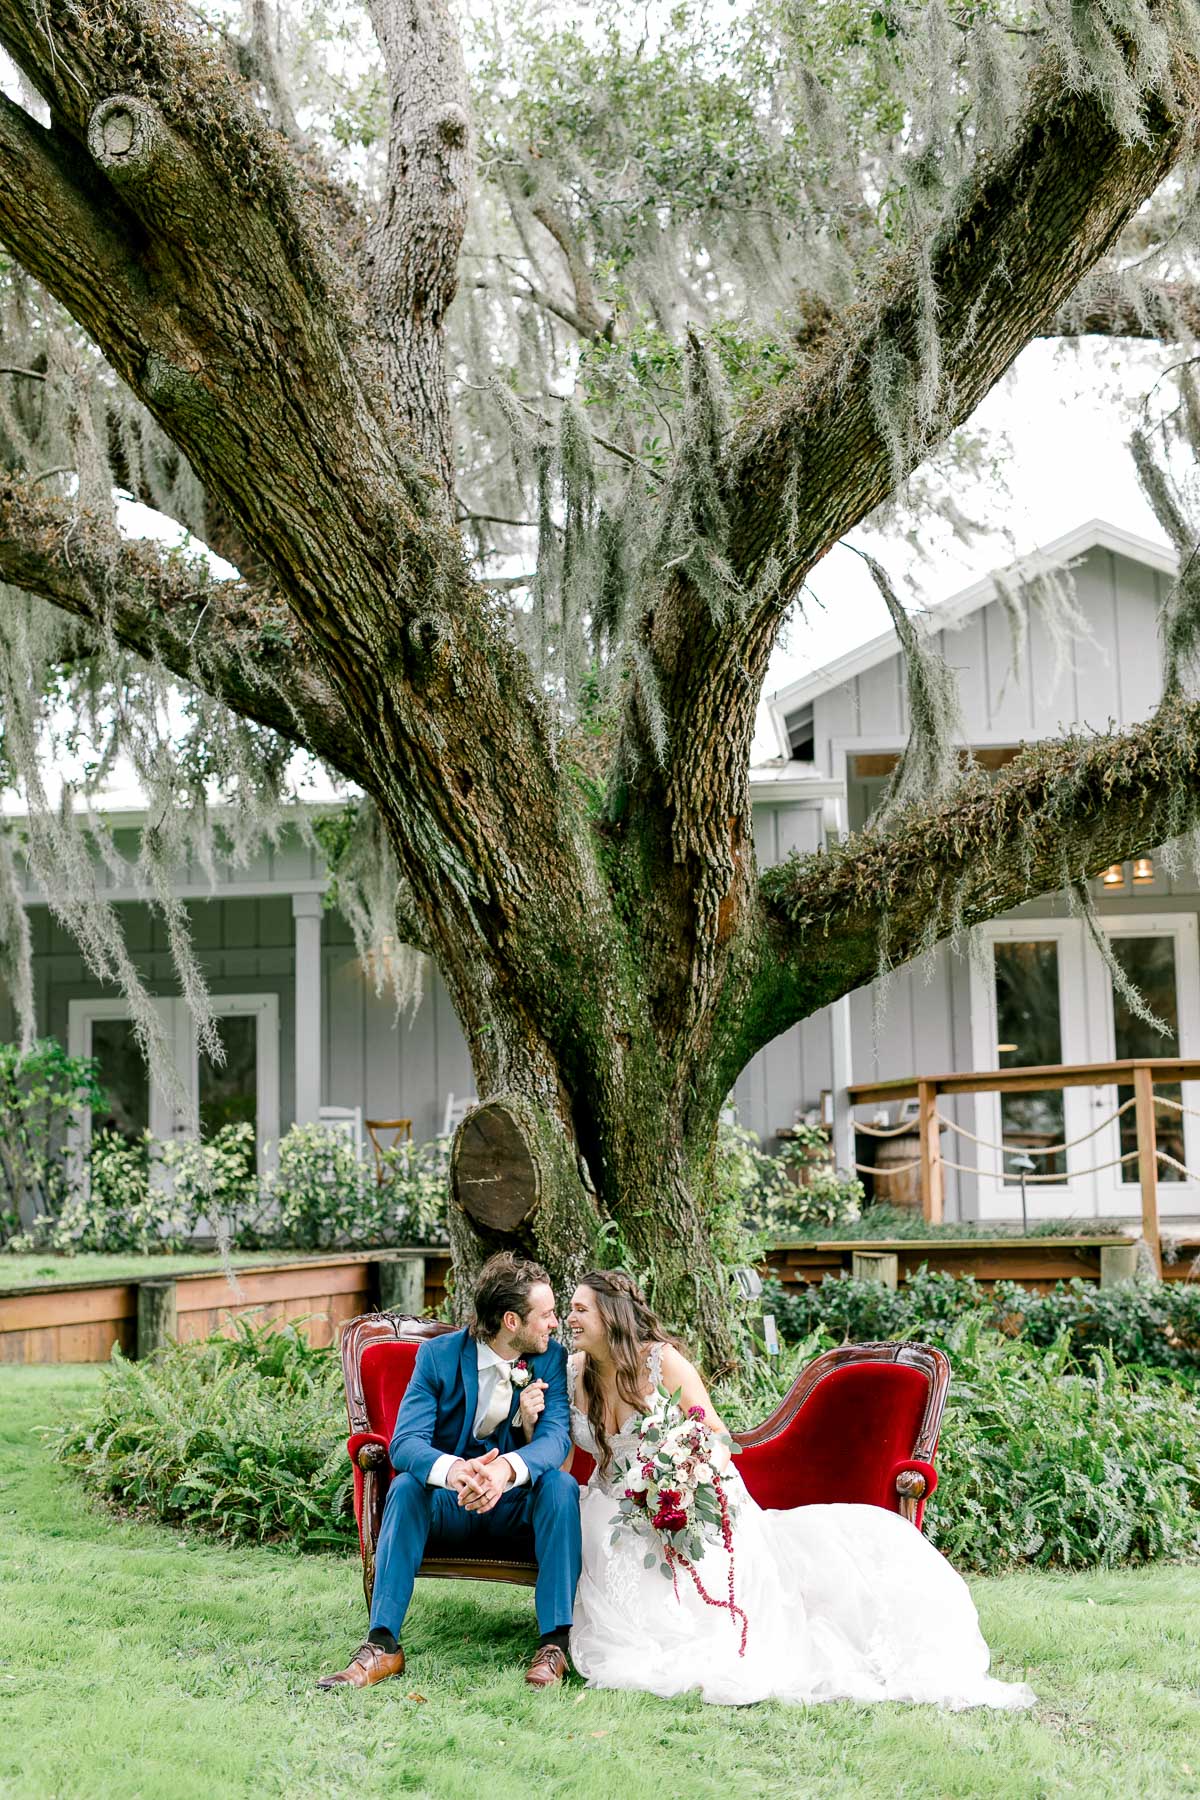 Bride and groom sitting on couch under old oak trees